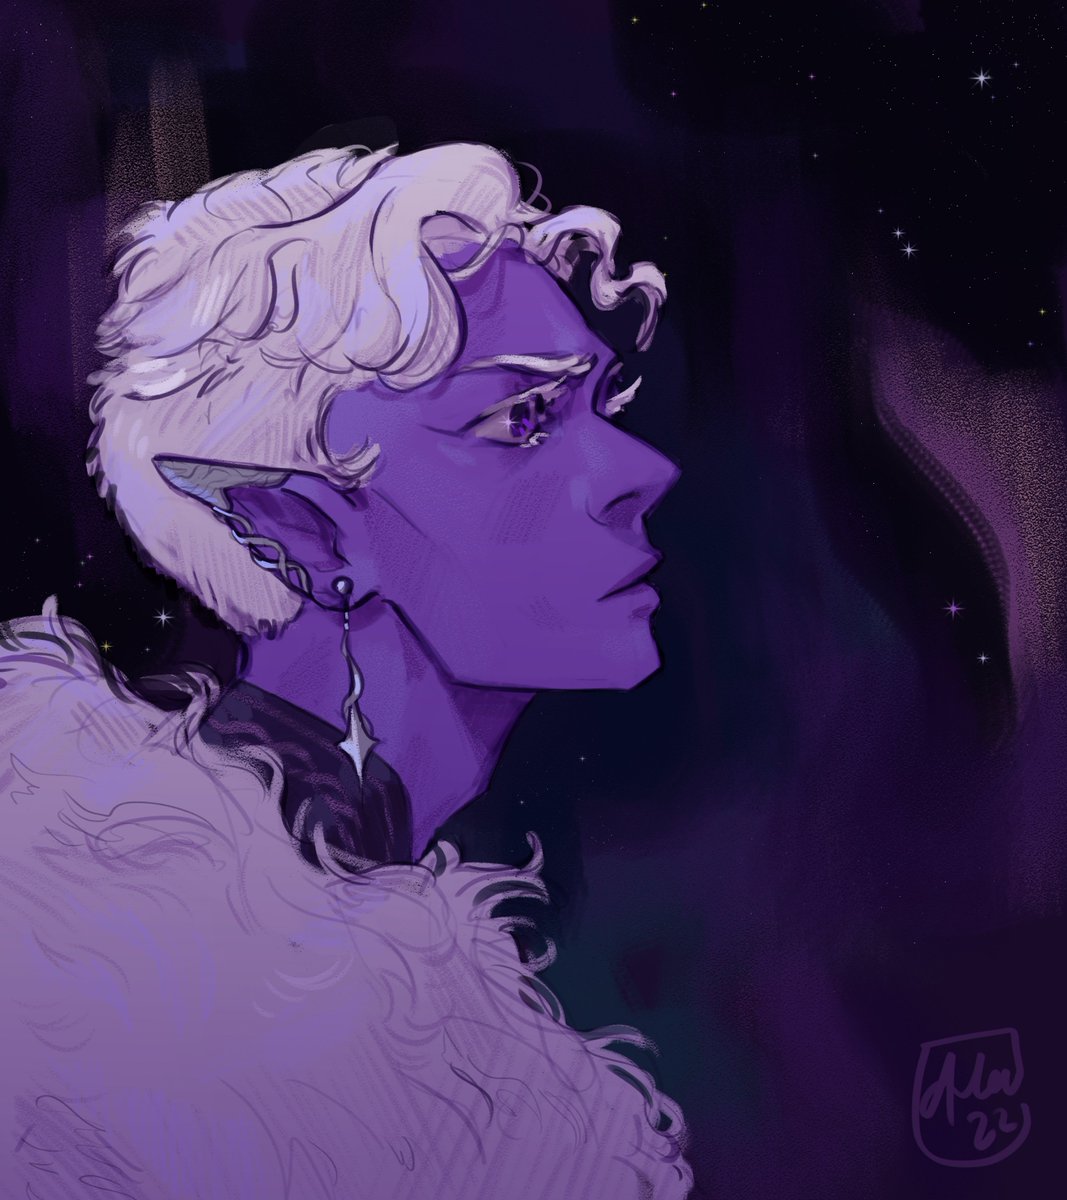 this was meant to be a quick sketch,,,
#criticalrolefanart #essekthelyss